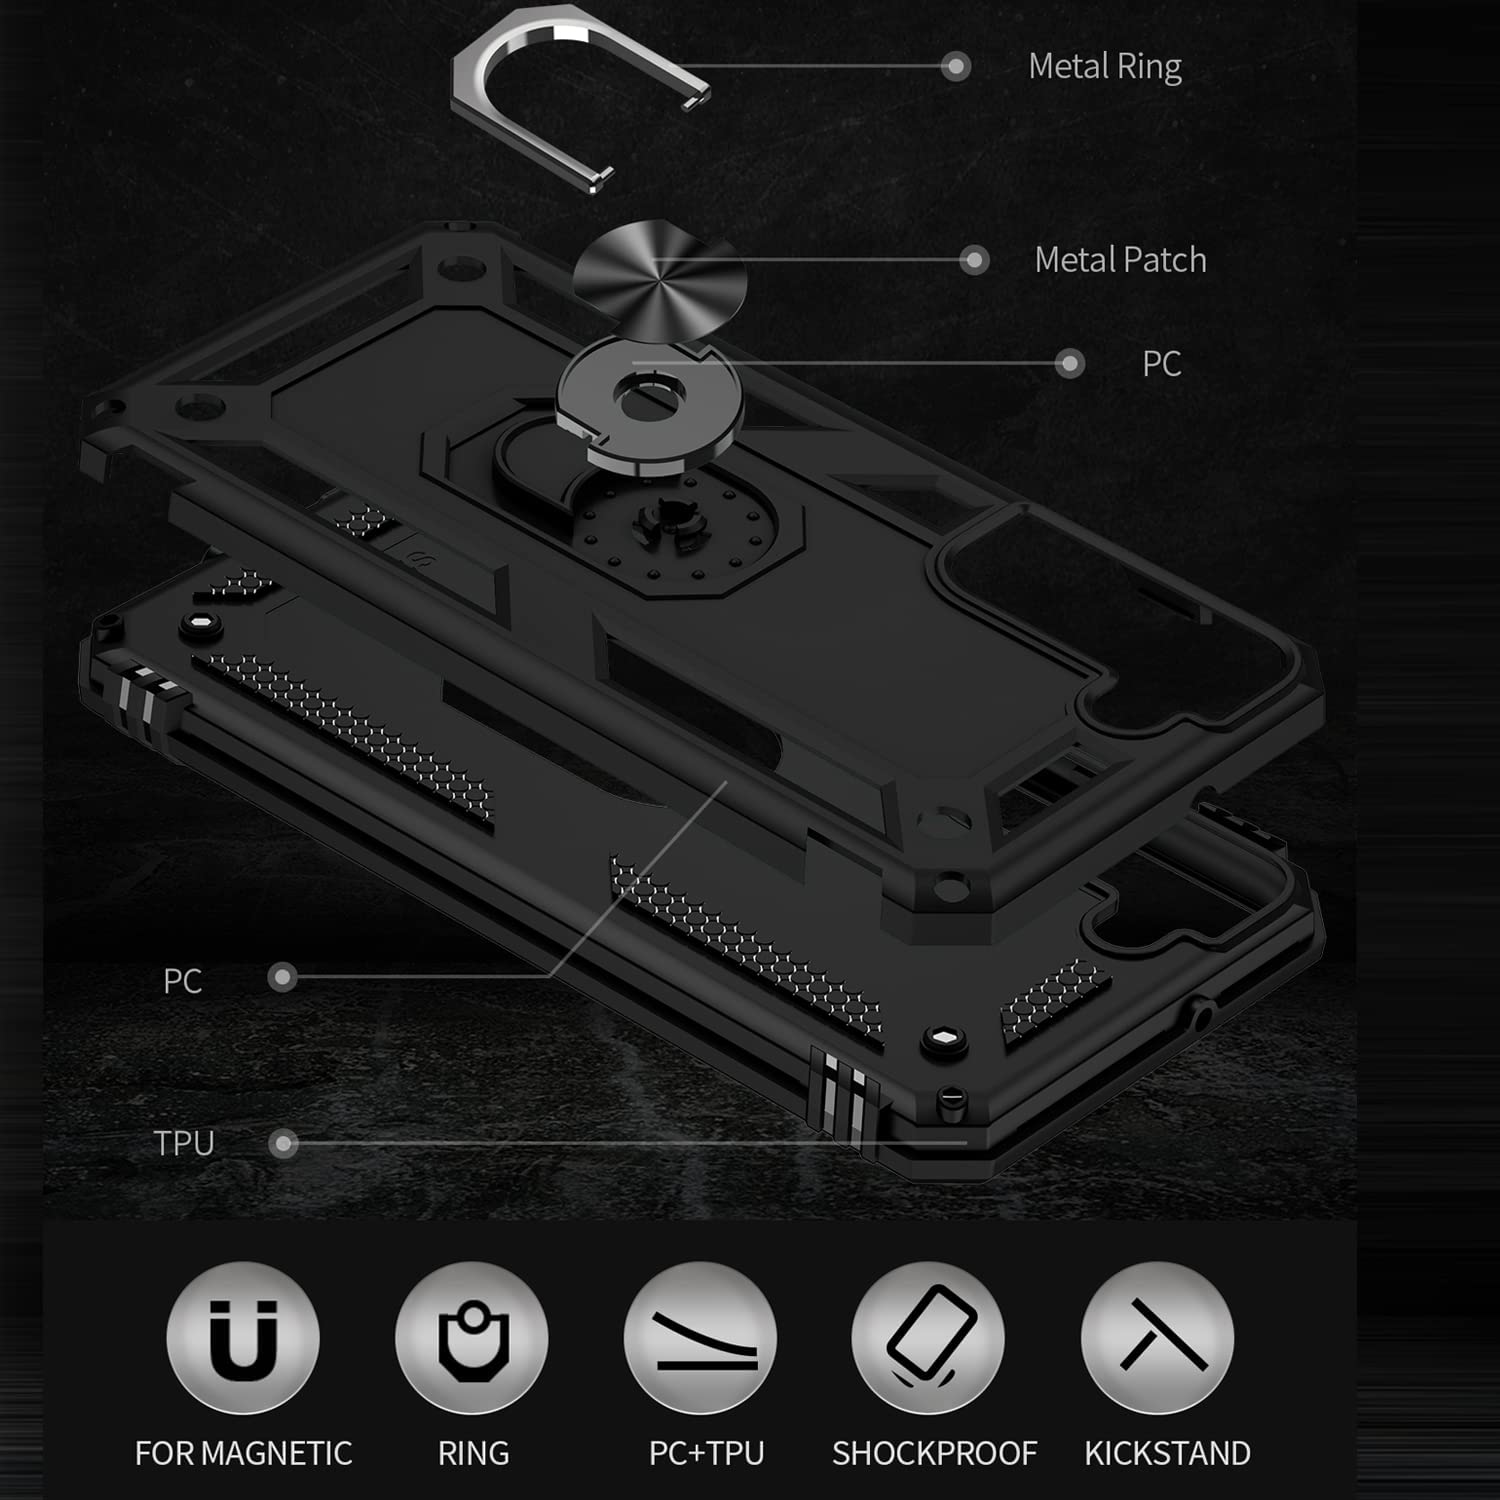 Hybrid Case Cover, Armor Shockproof Kickstand Metal Ring - NWZ03